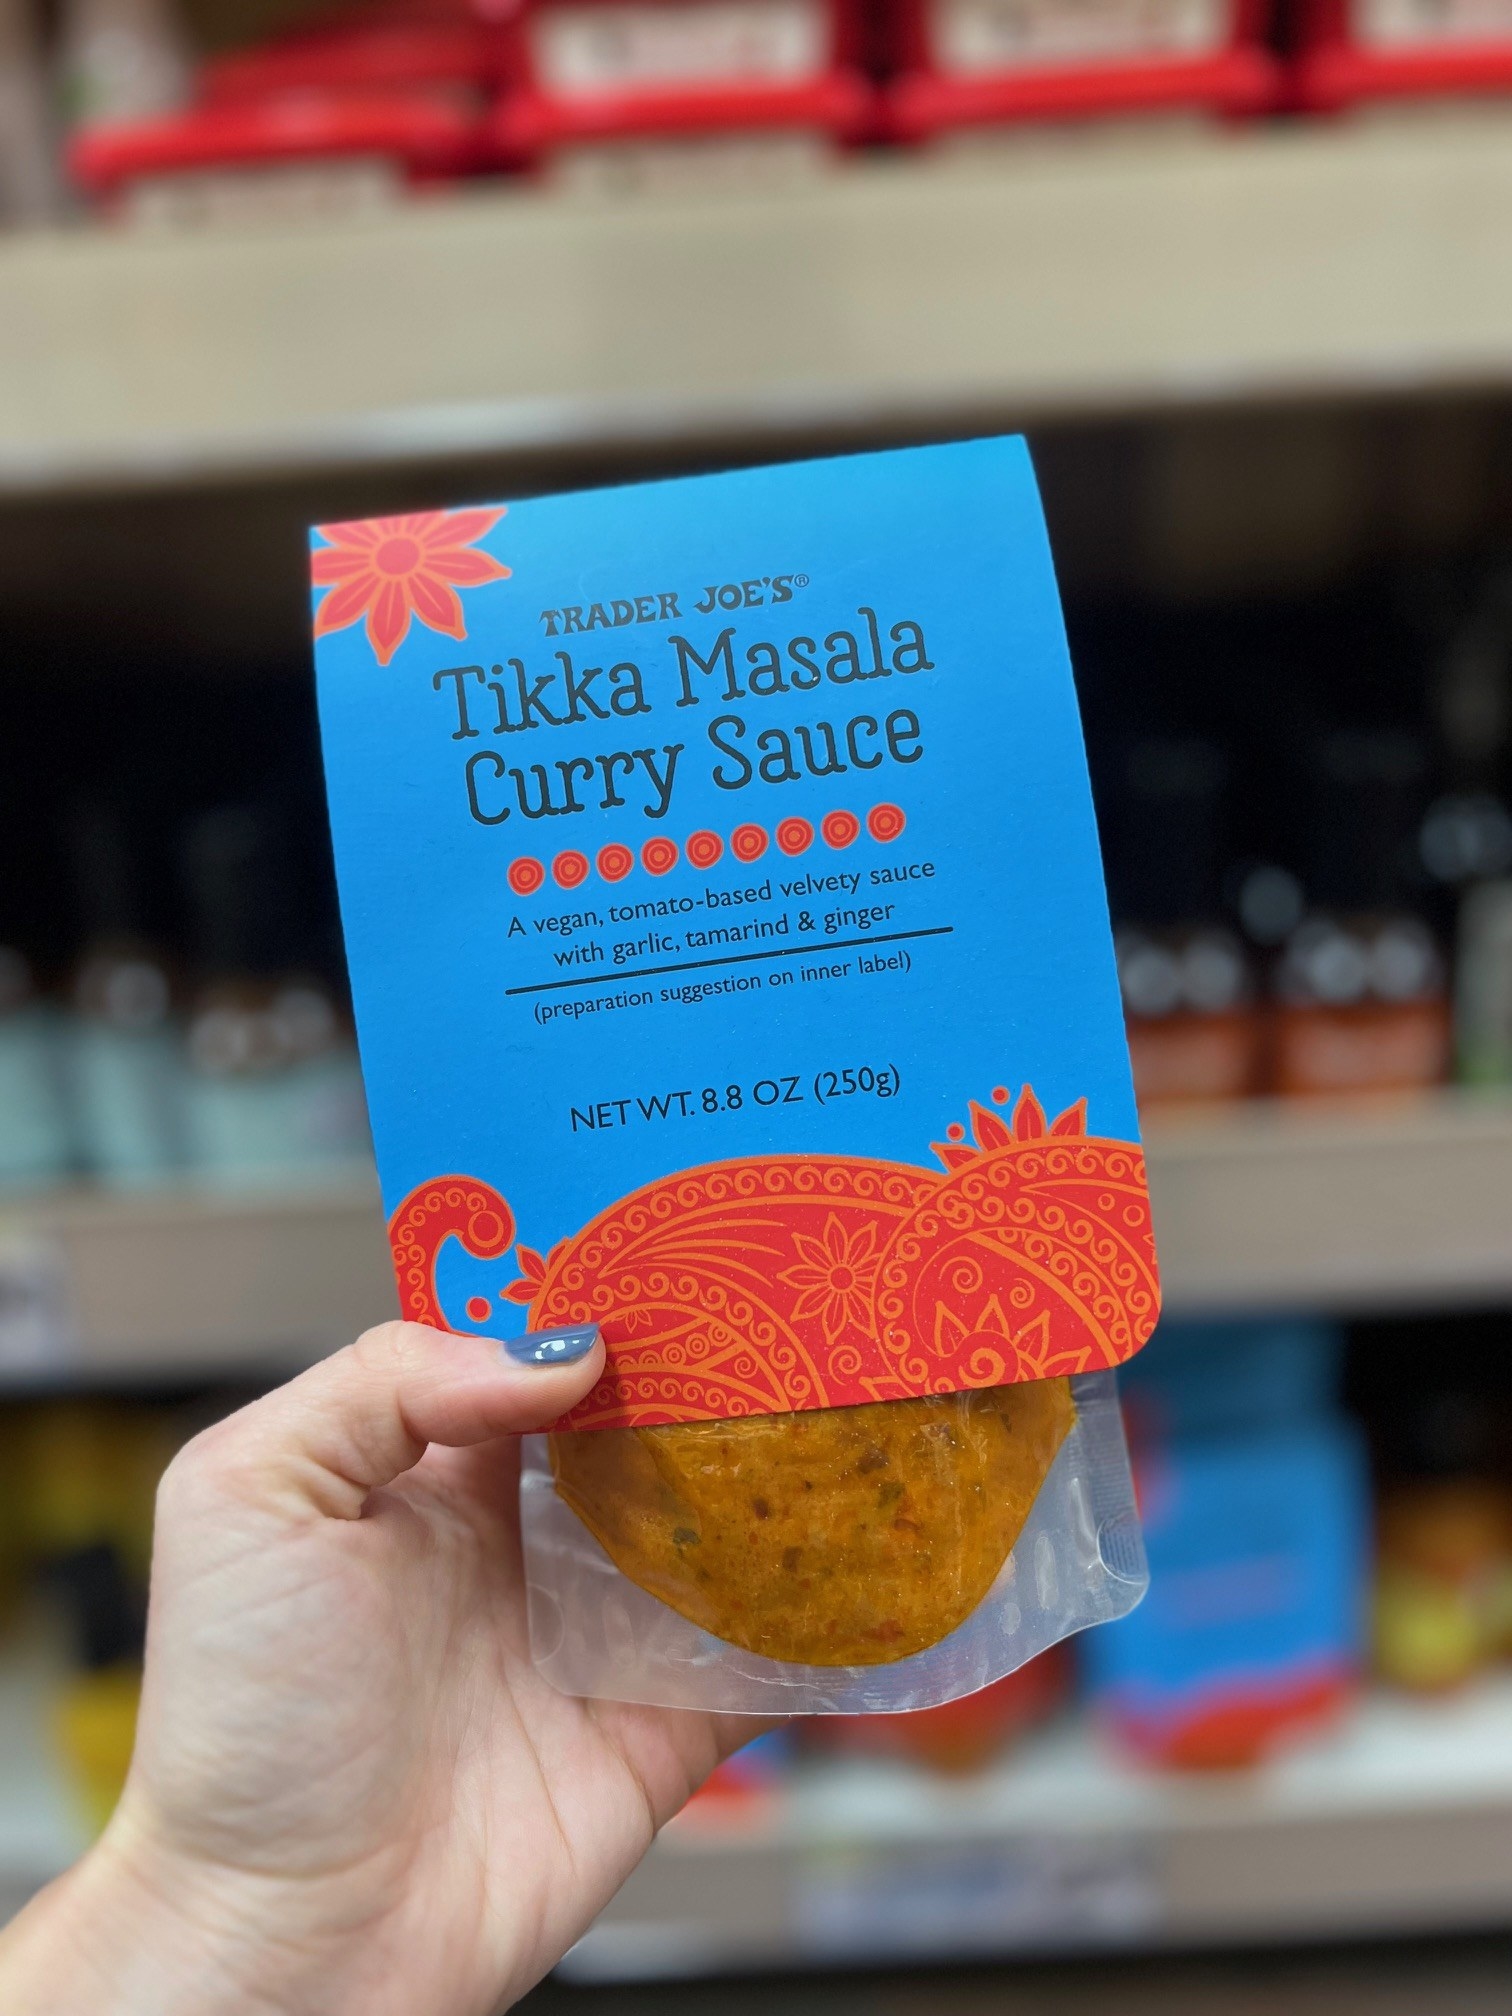 A package of Tikka Masala Curry Sauce: &quot;a vegan, tomato-based velvety sauce with garlic, tamarind &amp;amp; ginger&quot;